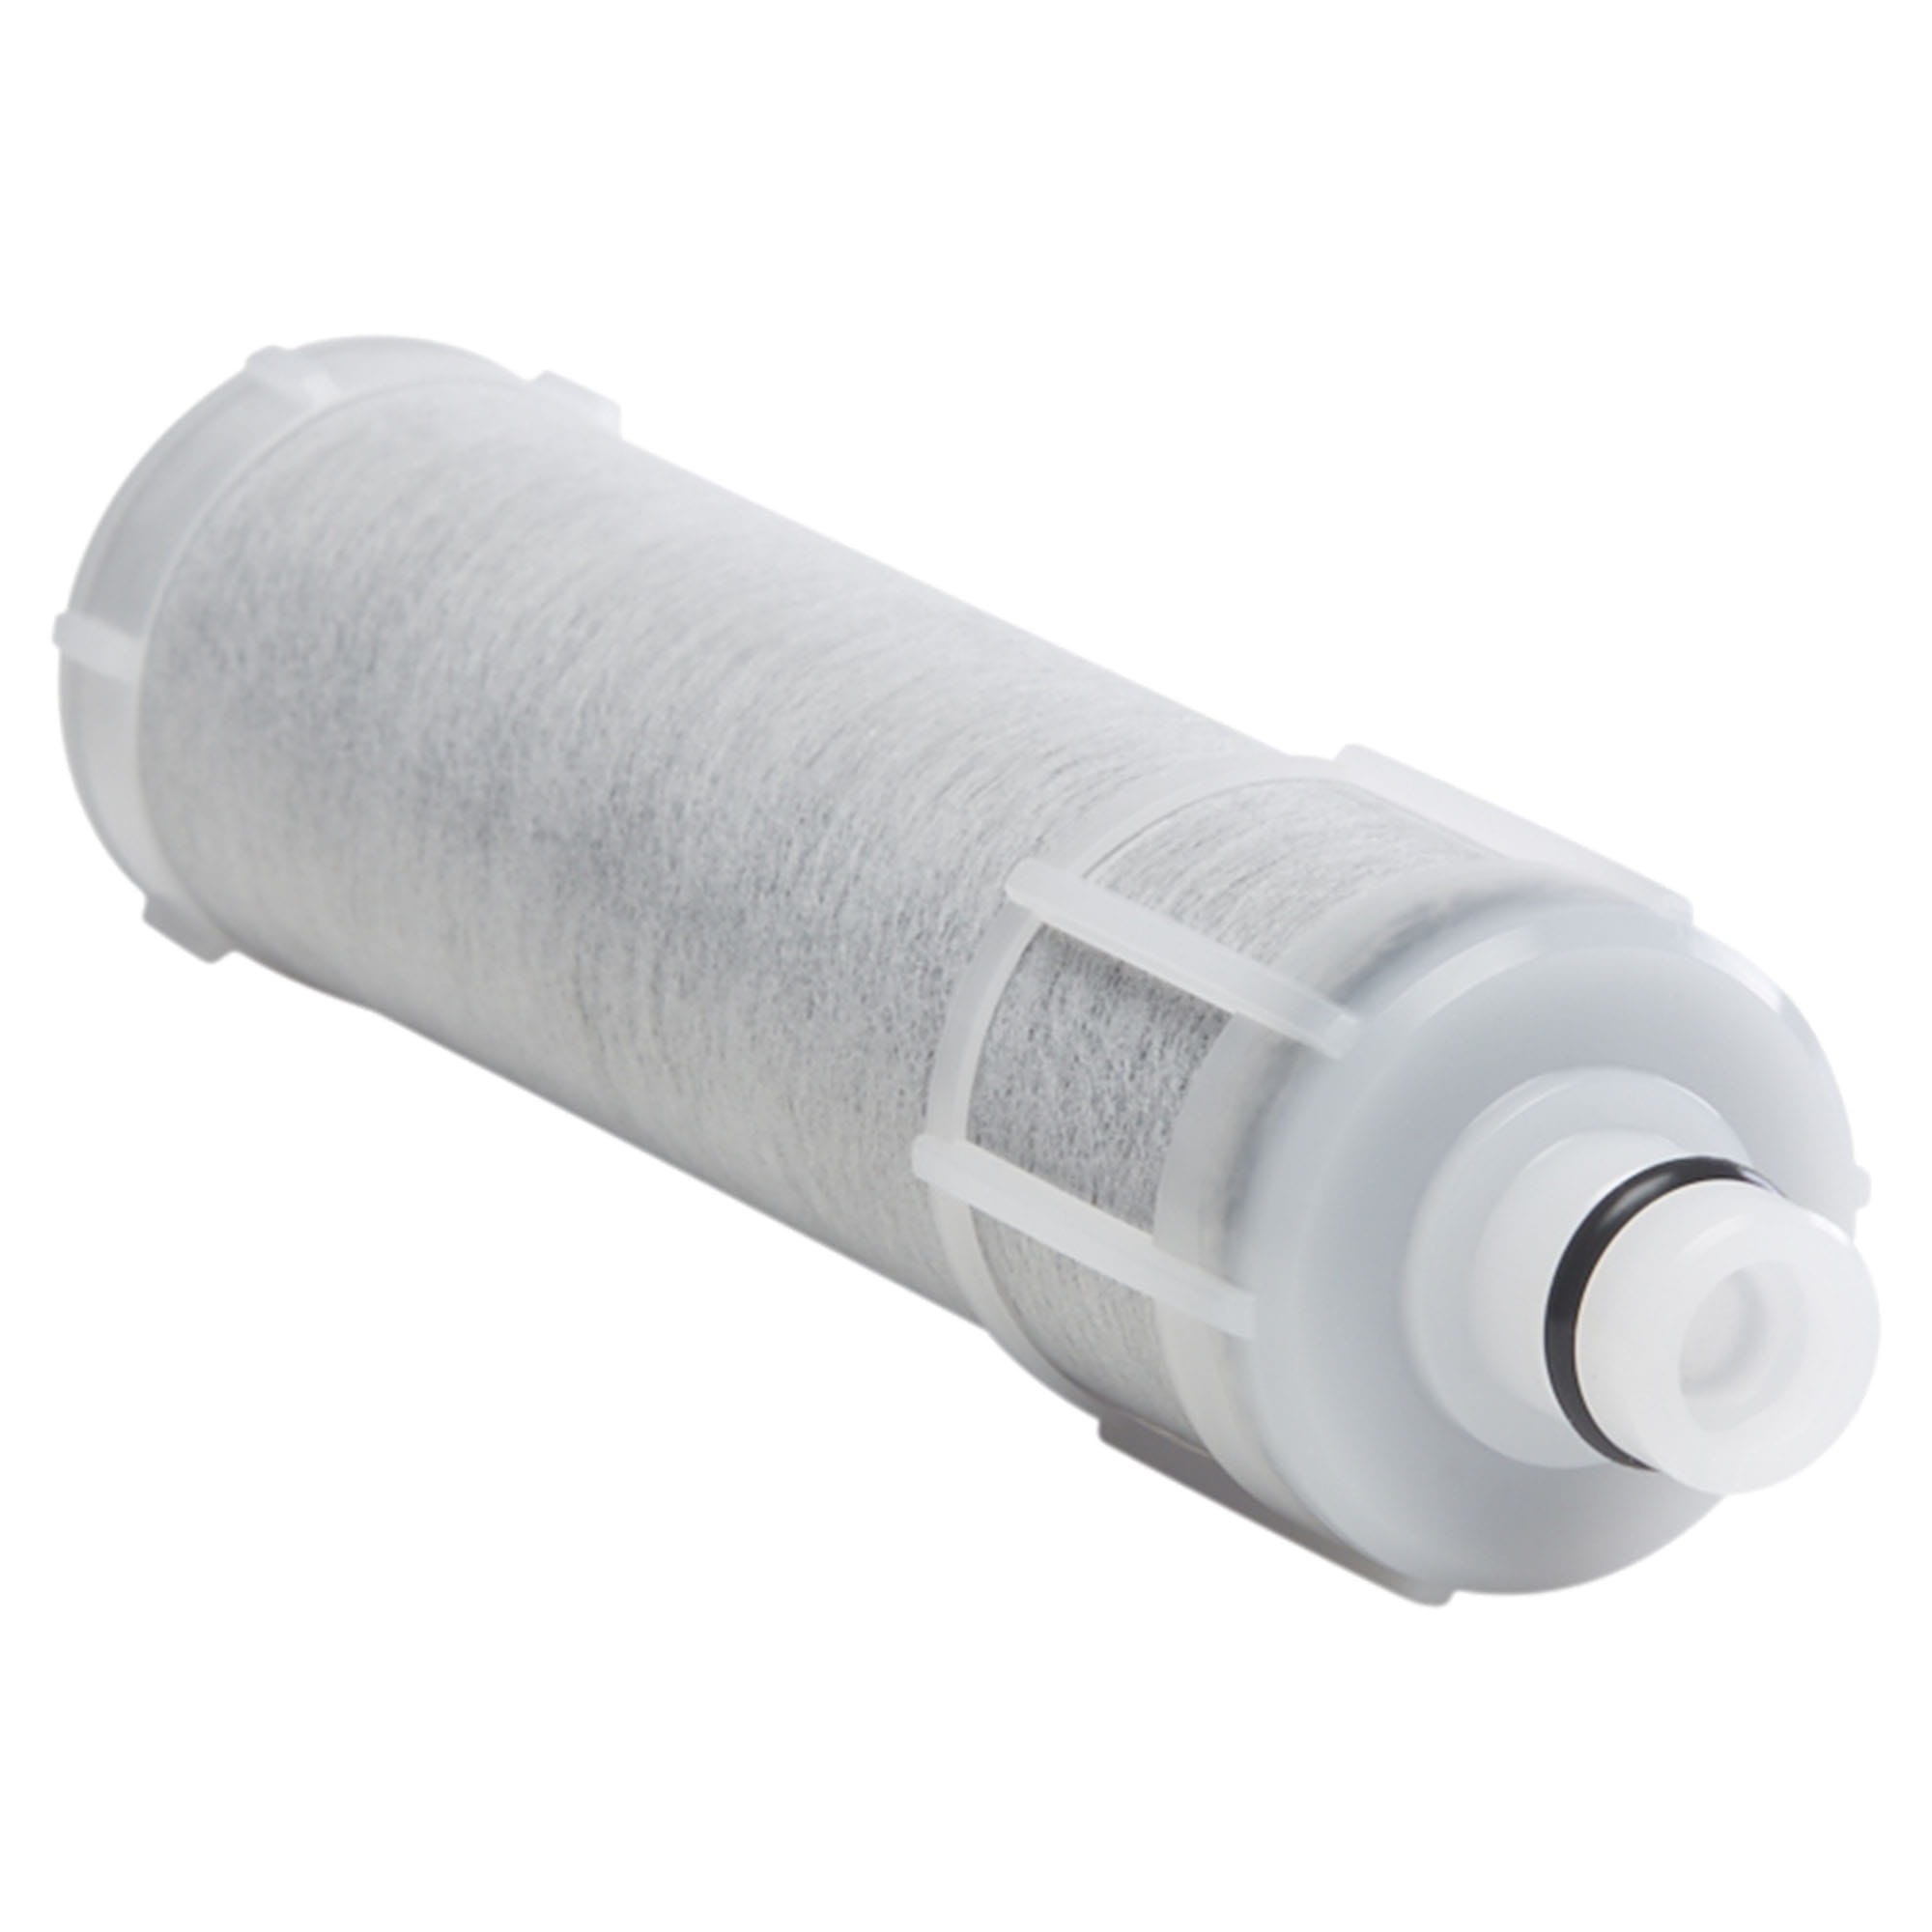 Kitchen Filter Replacement Cartridge for Saybrook Faucet NO FINISH